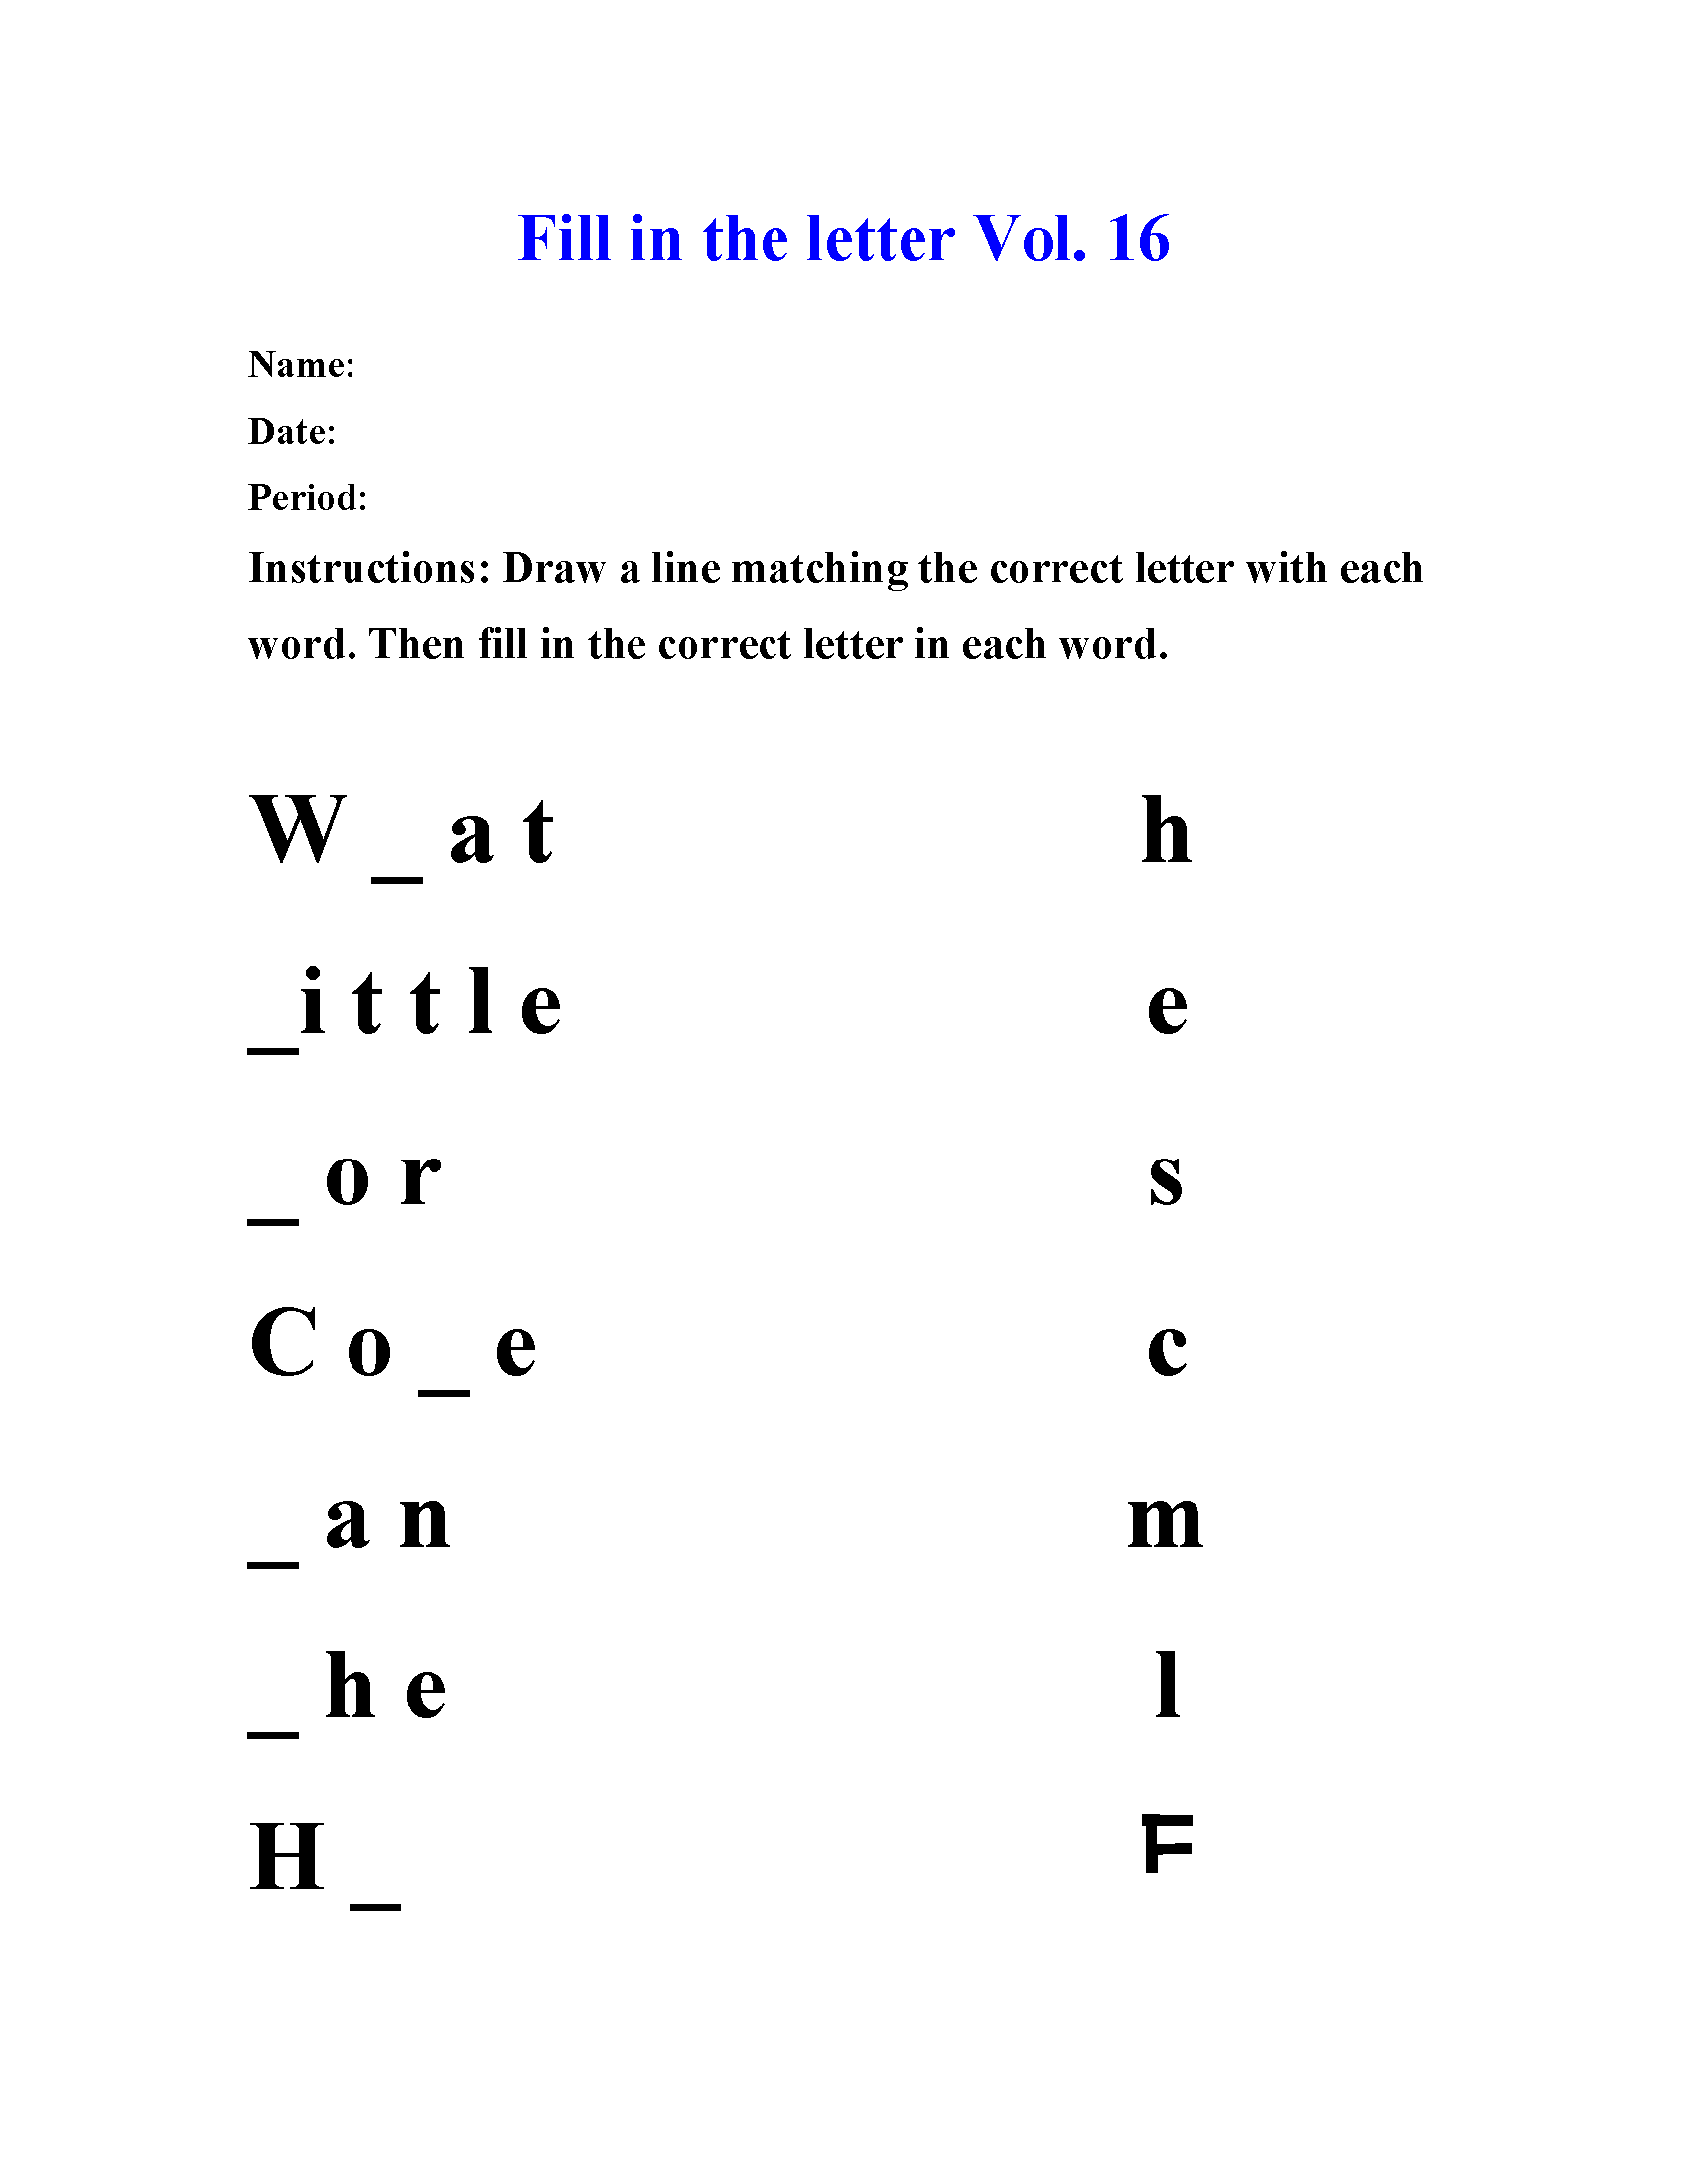 Fill in the letter Vol 16